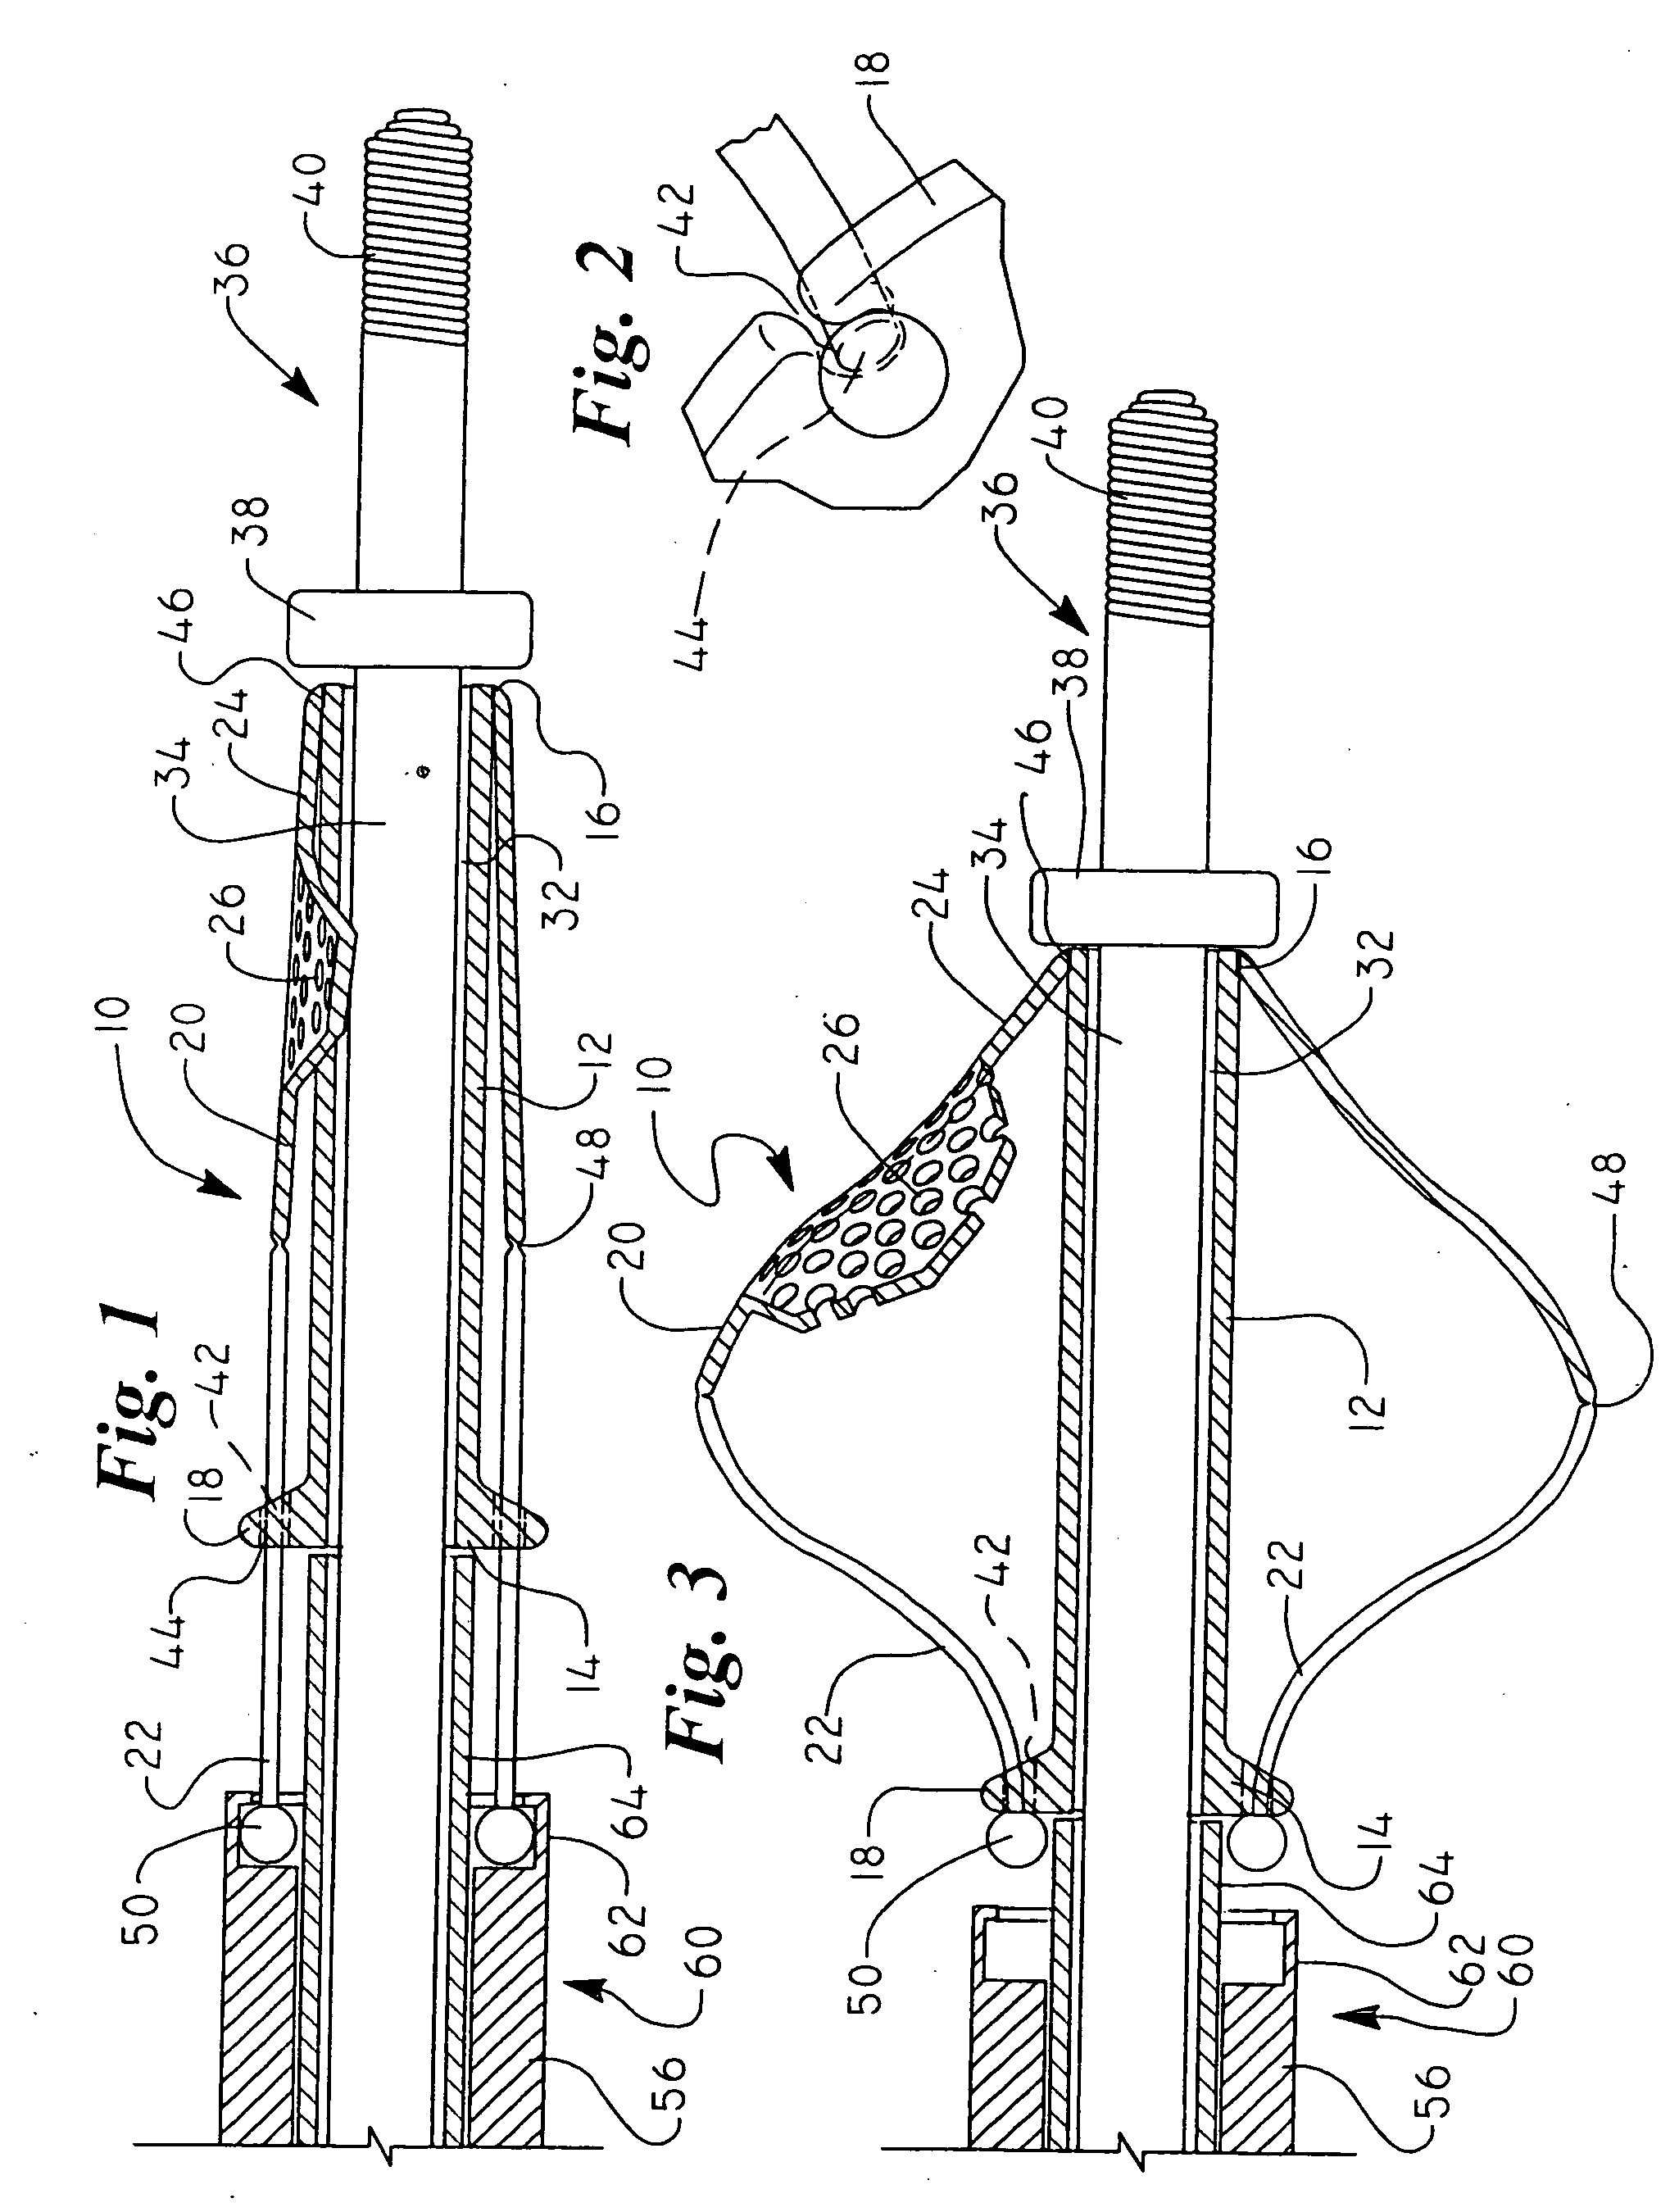 Cartridge embolic protection filter and methods of use